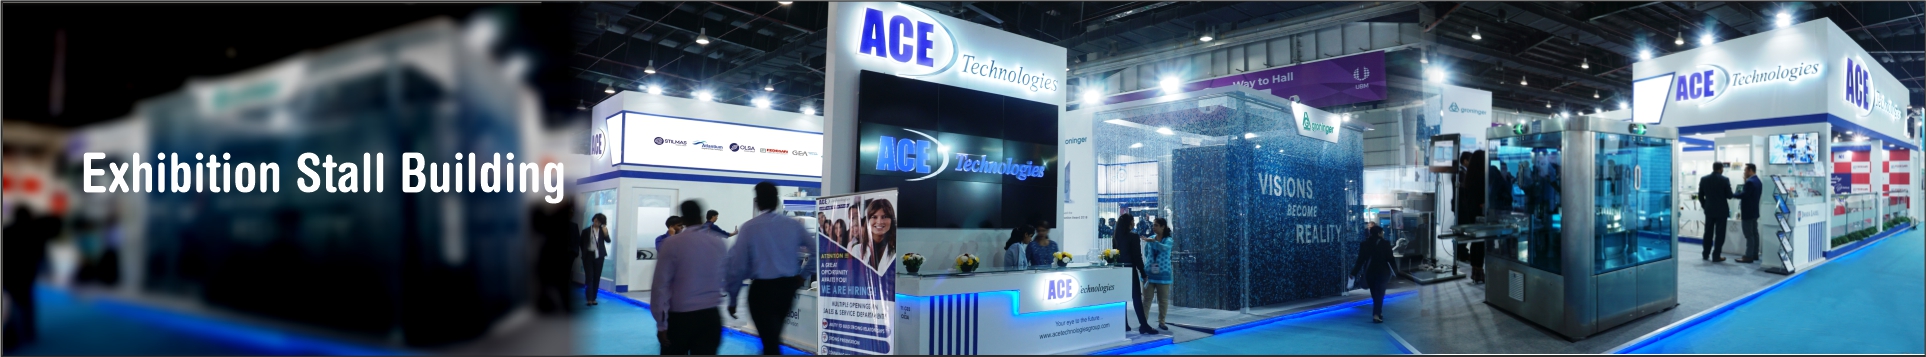 exhibition stand building banner web